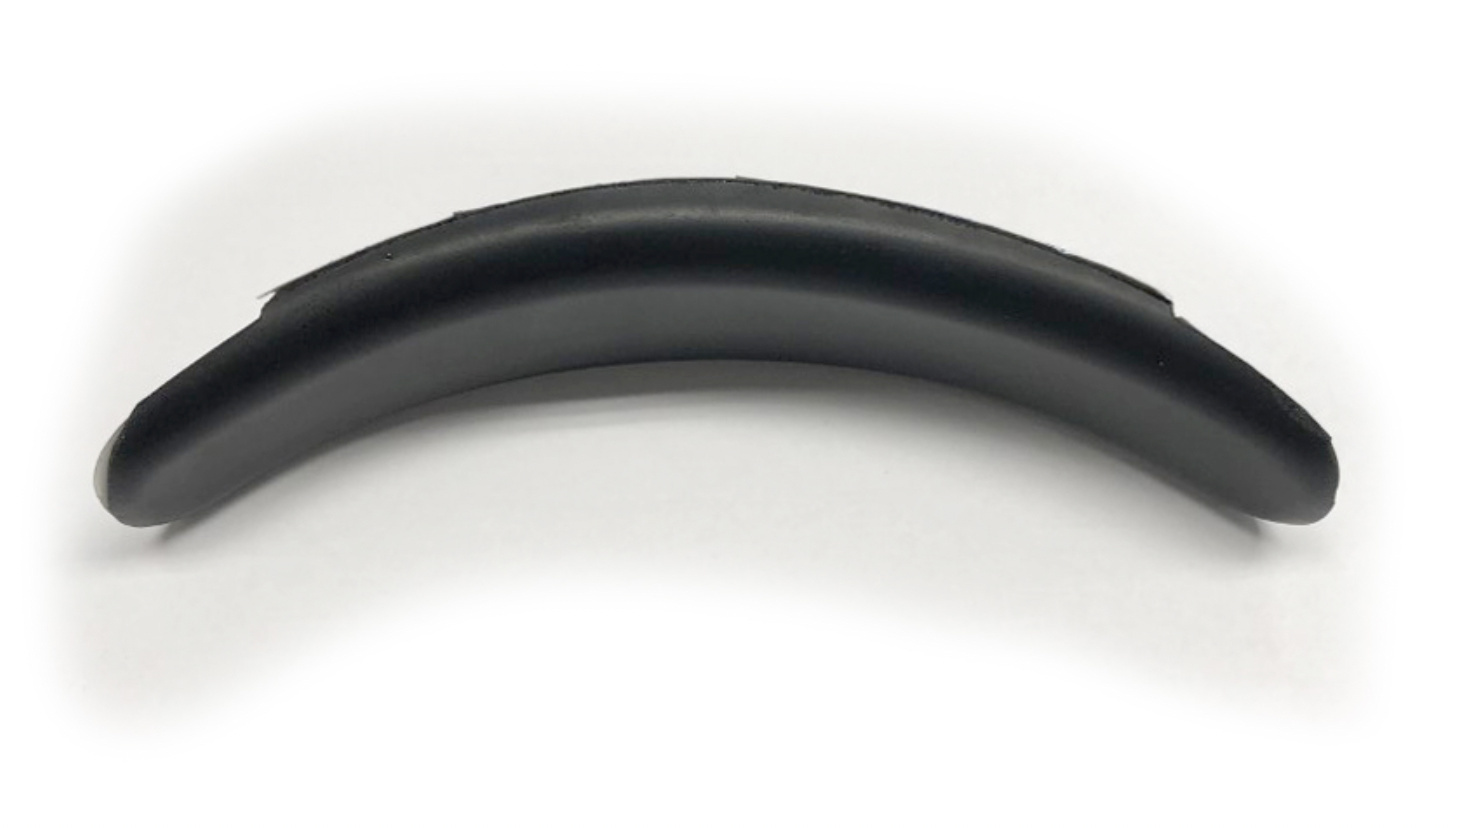 Eartec Replacement Headband Pad for UltraLITE